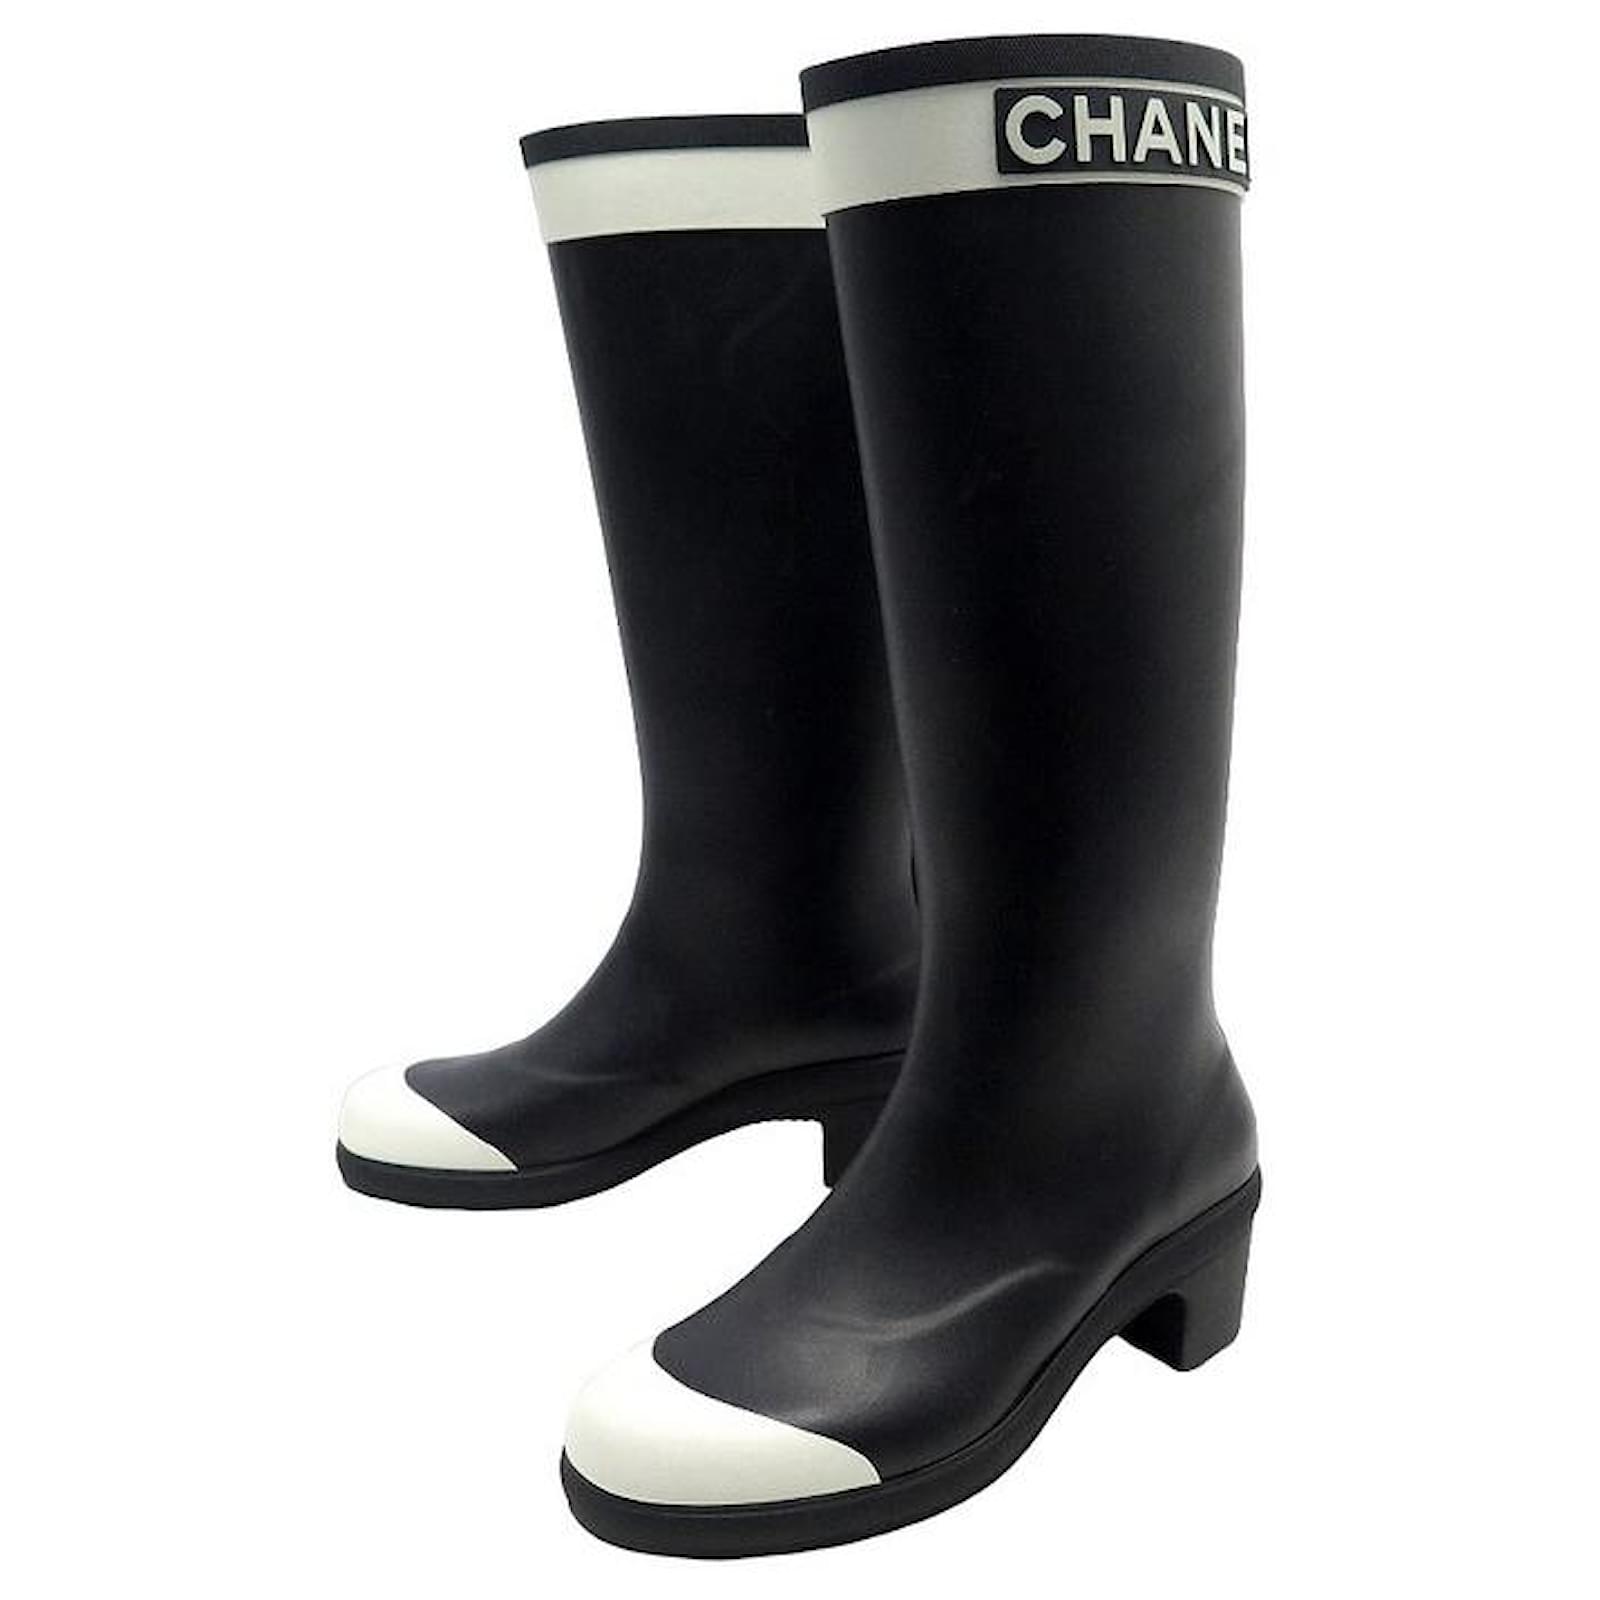 CHANEL, Shoes, Chanel Boots